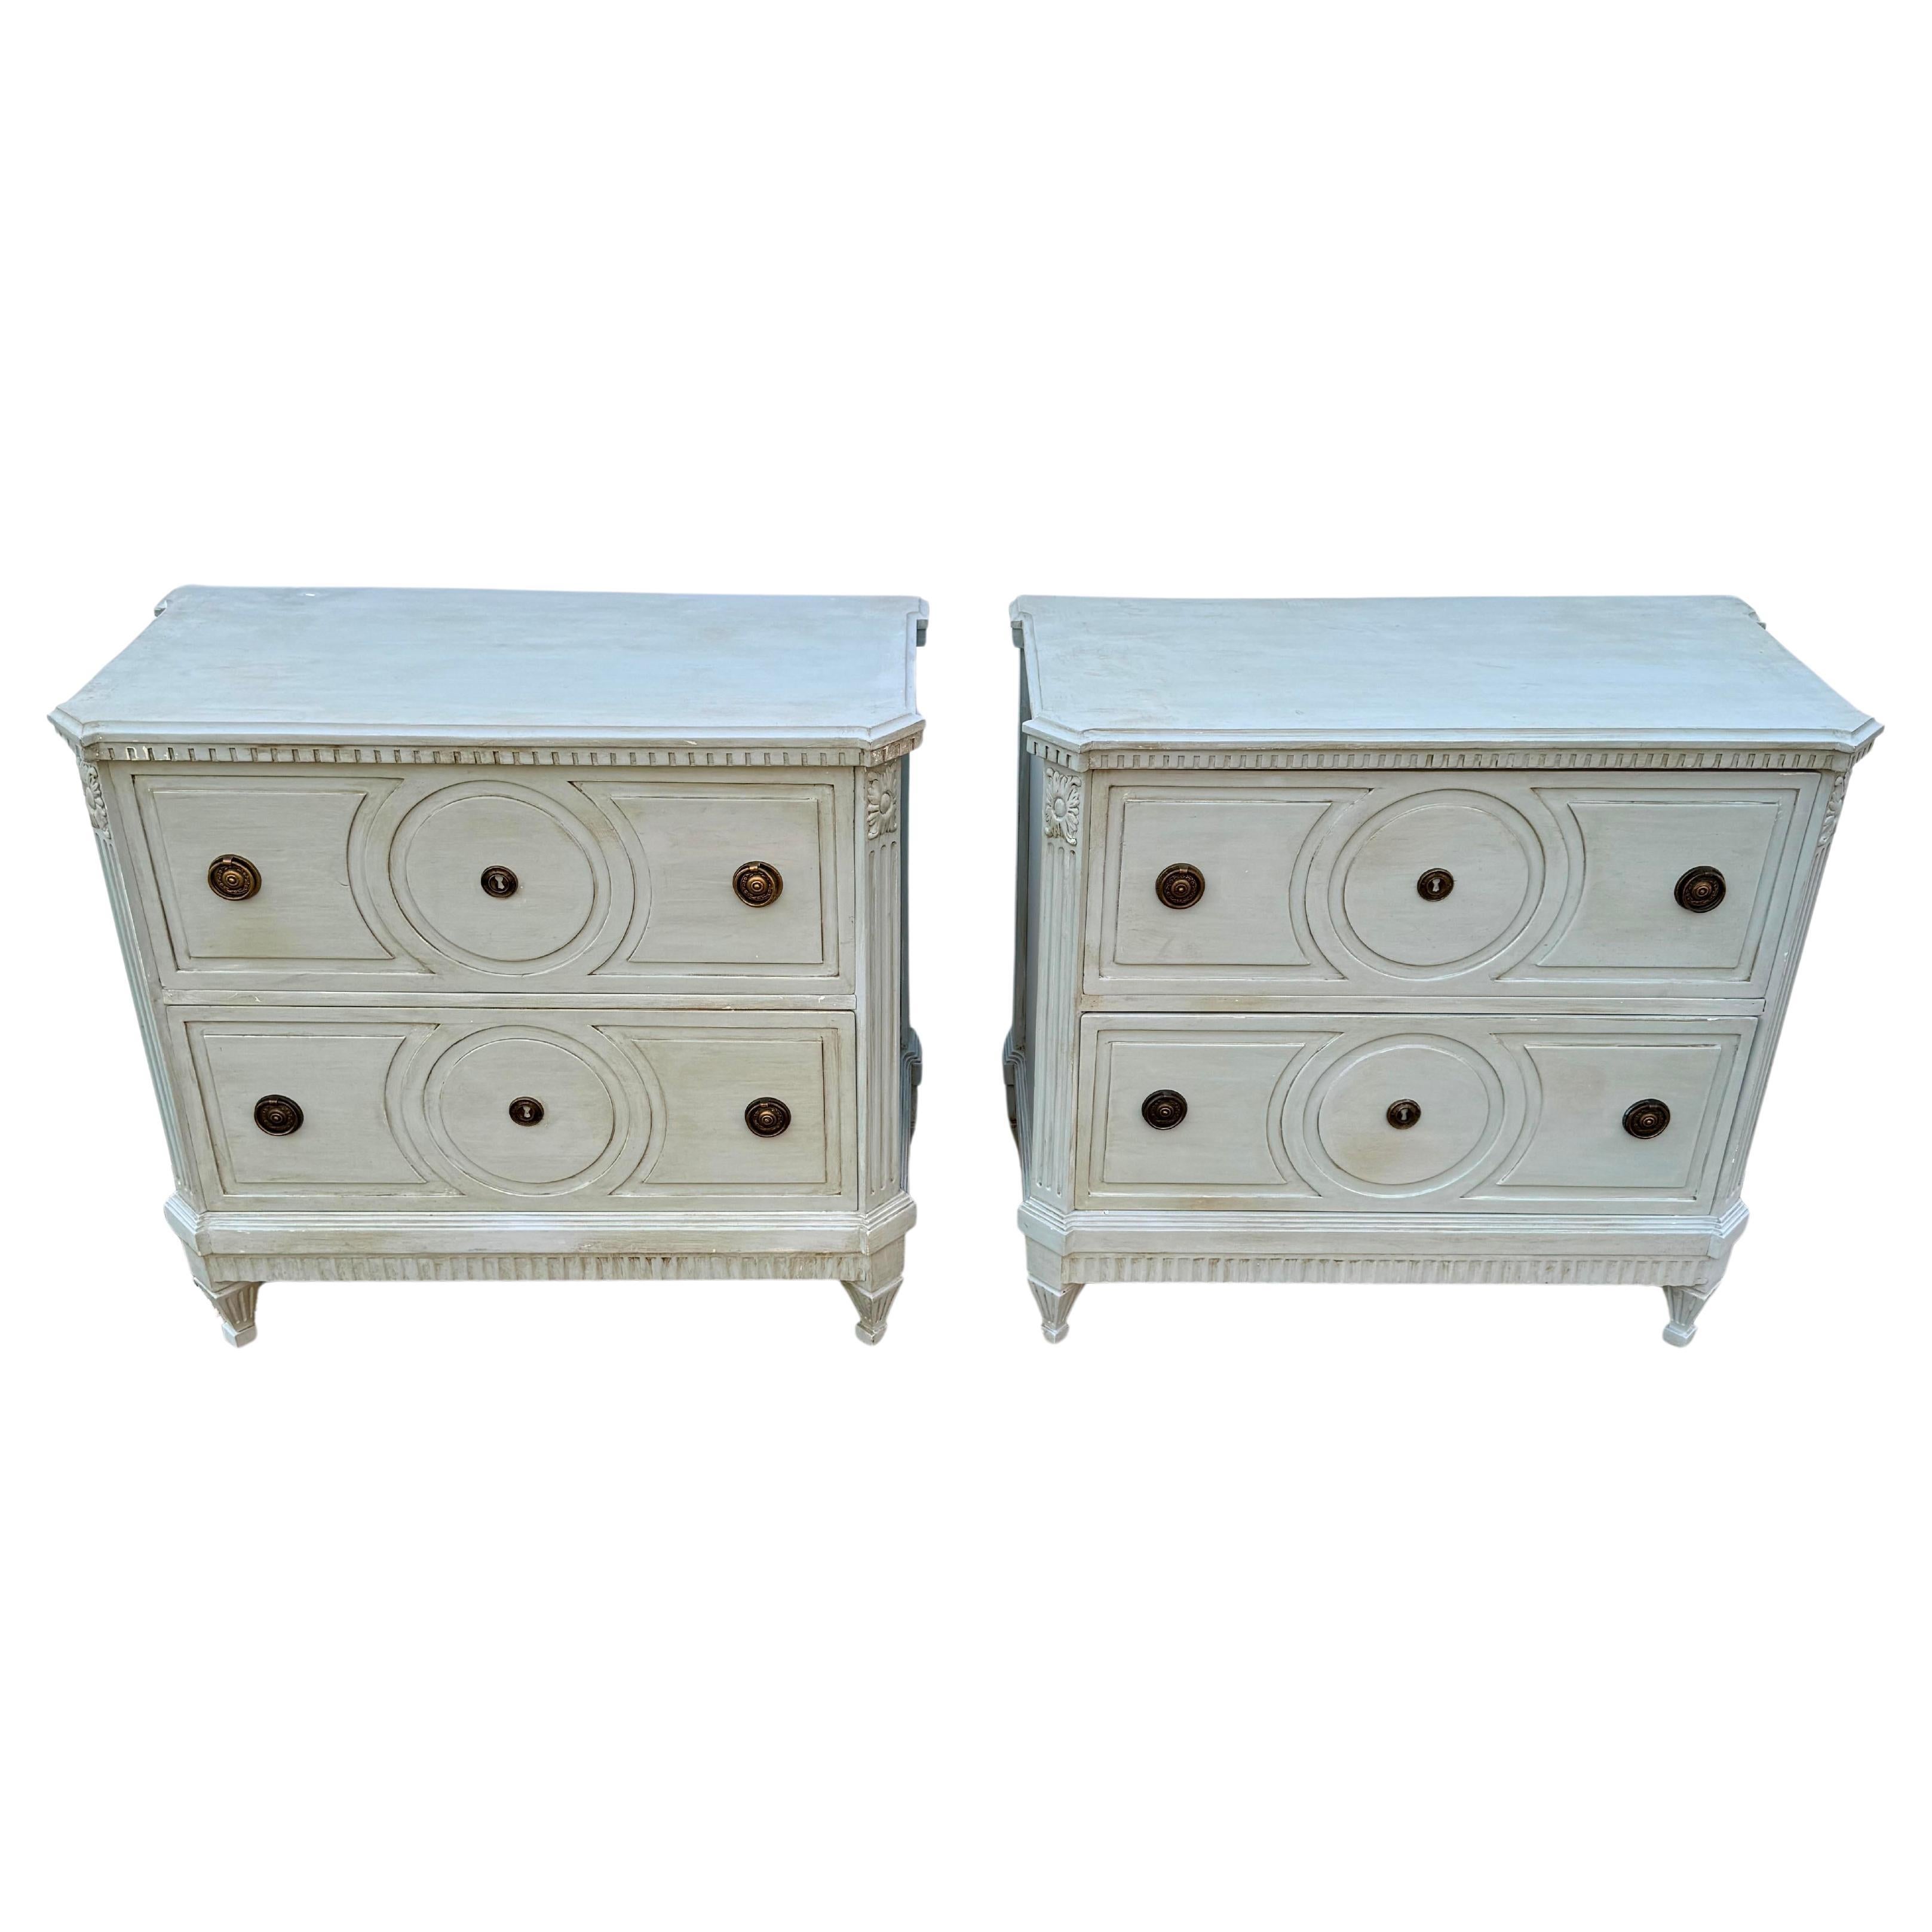 Swedish Gustavian Style Blue Painted Chest of Drawers Commodes, A Pair

Classic Pair Swedish Style Painted Chest of Drawers. Two drawer chests based on an 18th Century Gustavian antique chests. Hand made and hand painted with solid wood legs and